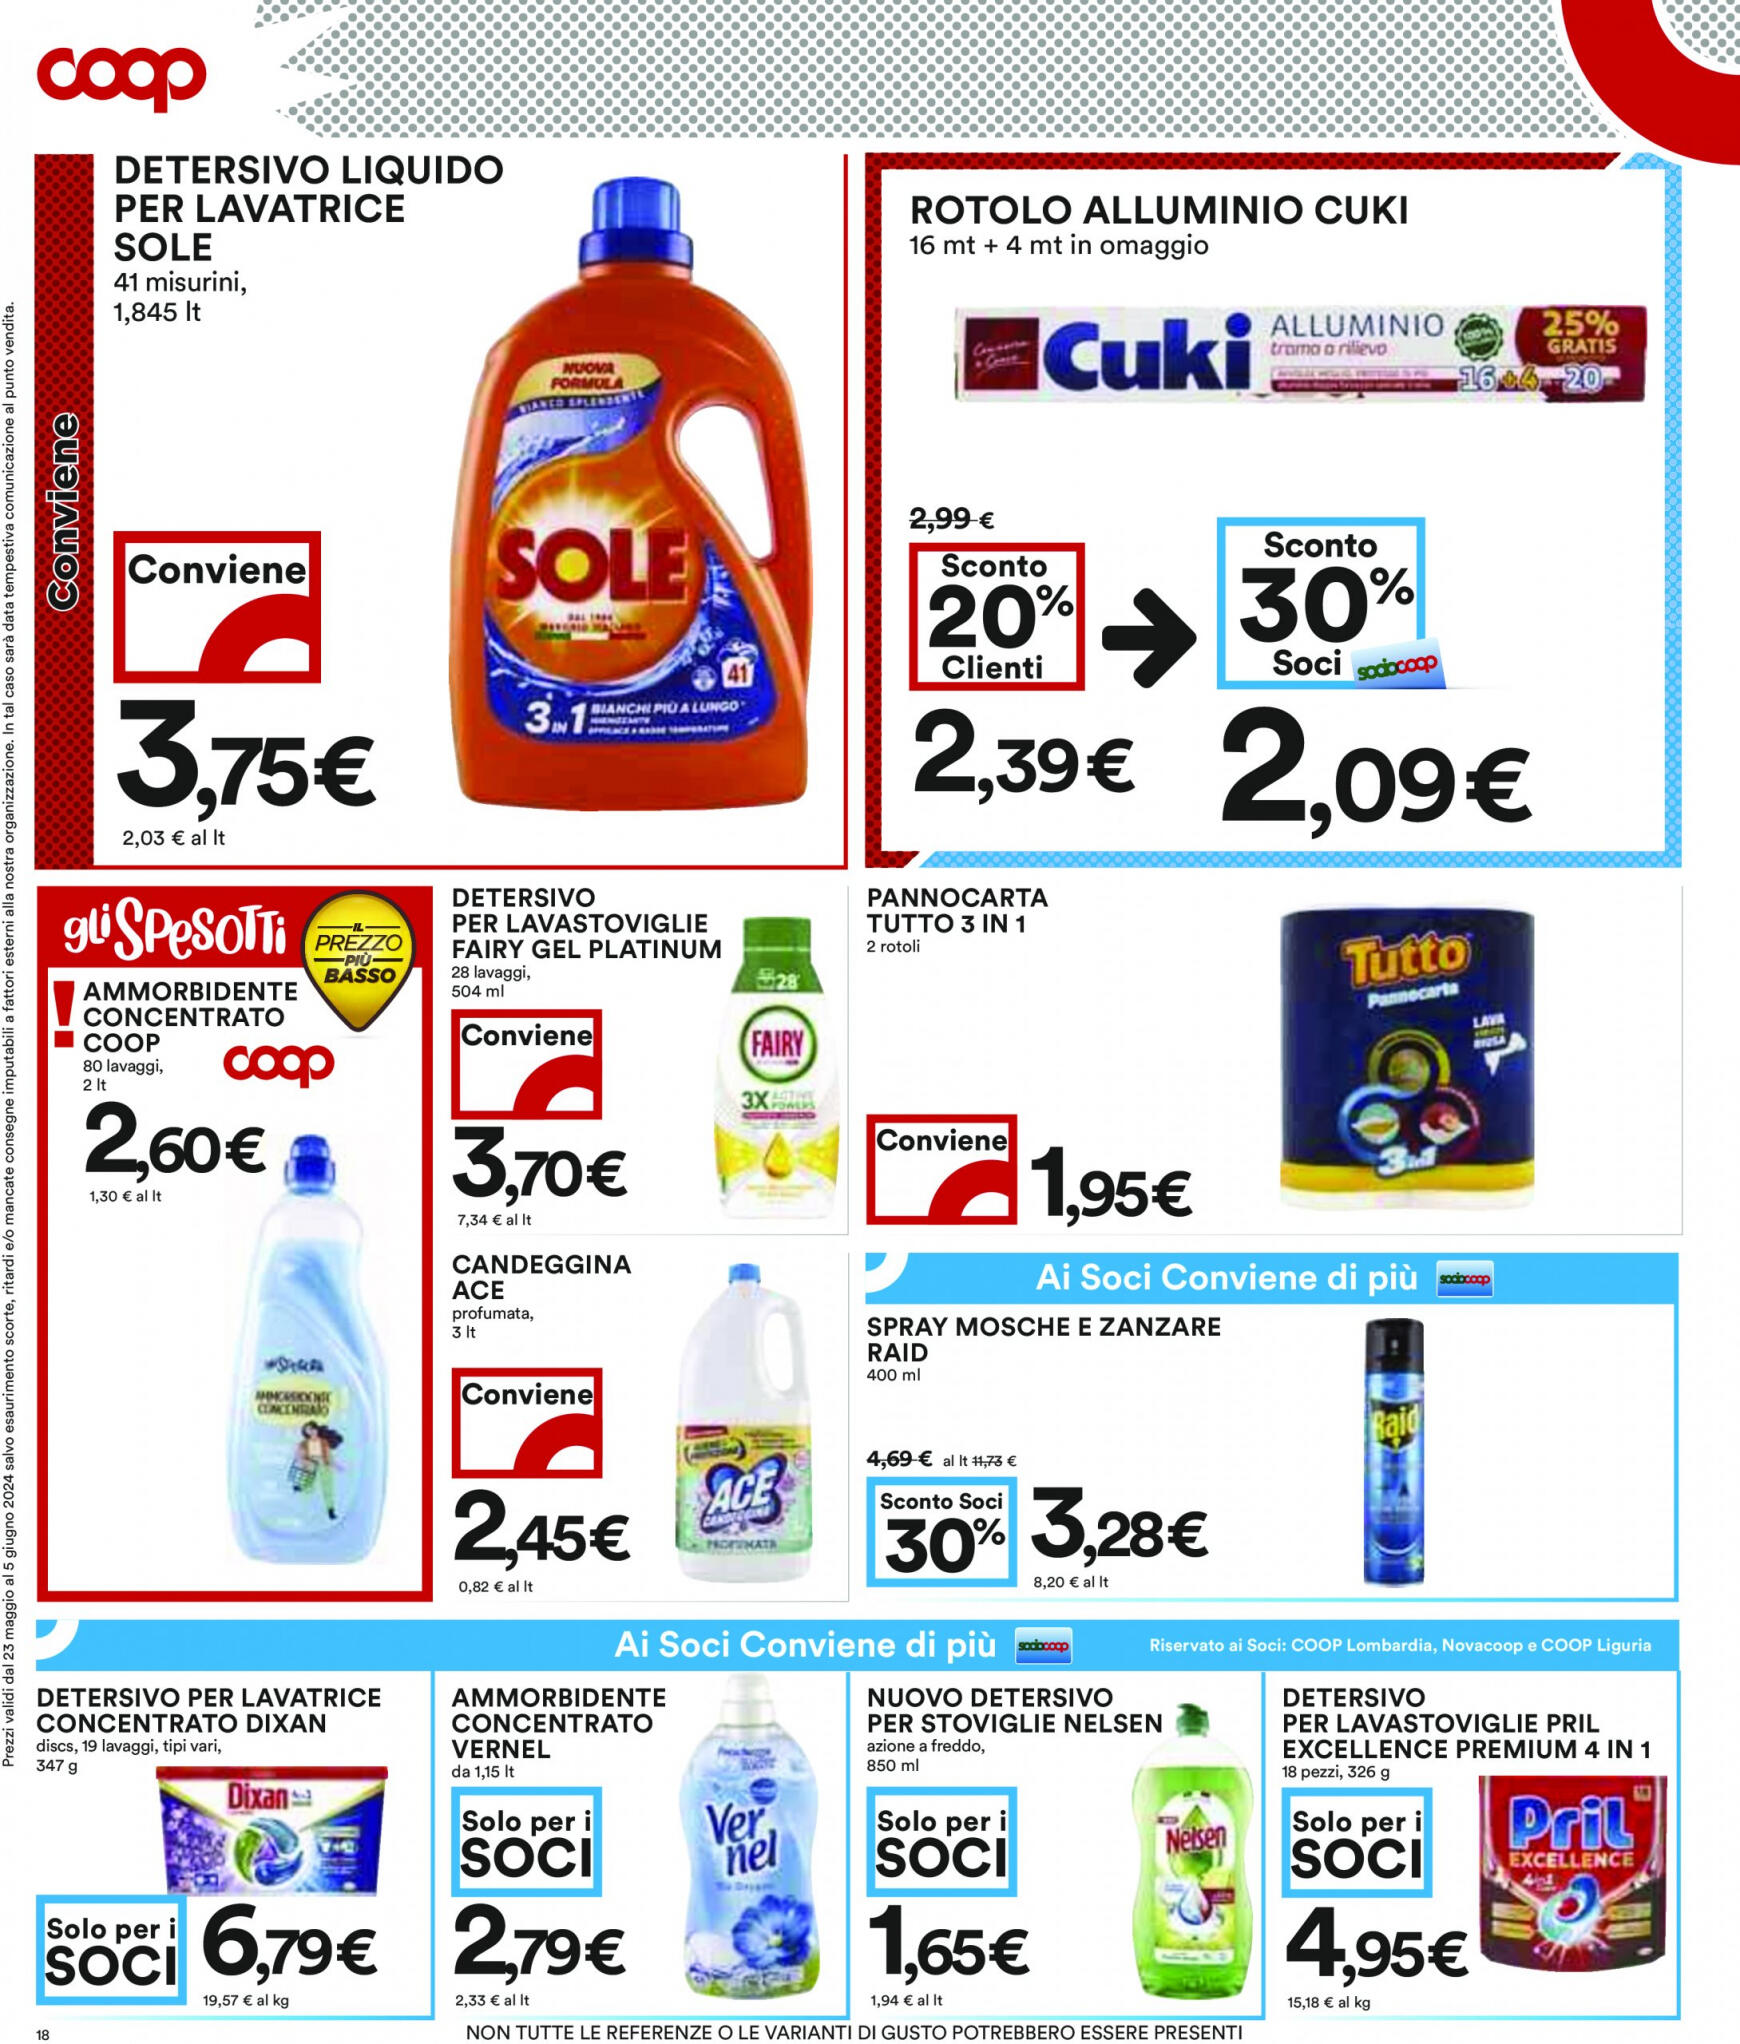 coop - Nuovo volantino Coop 23.05. - 05.06. - page: 18